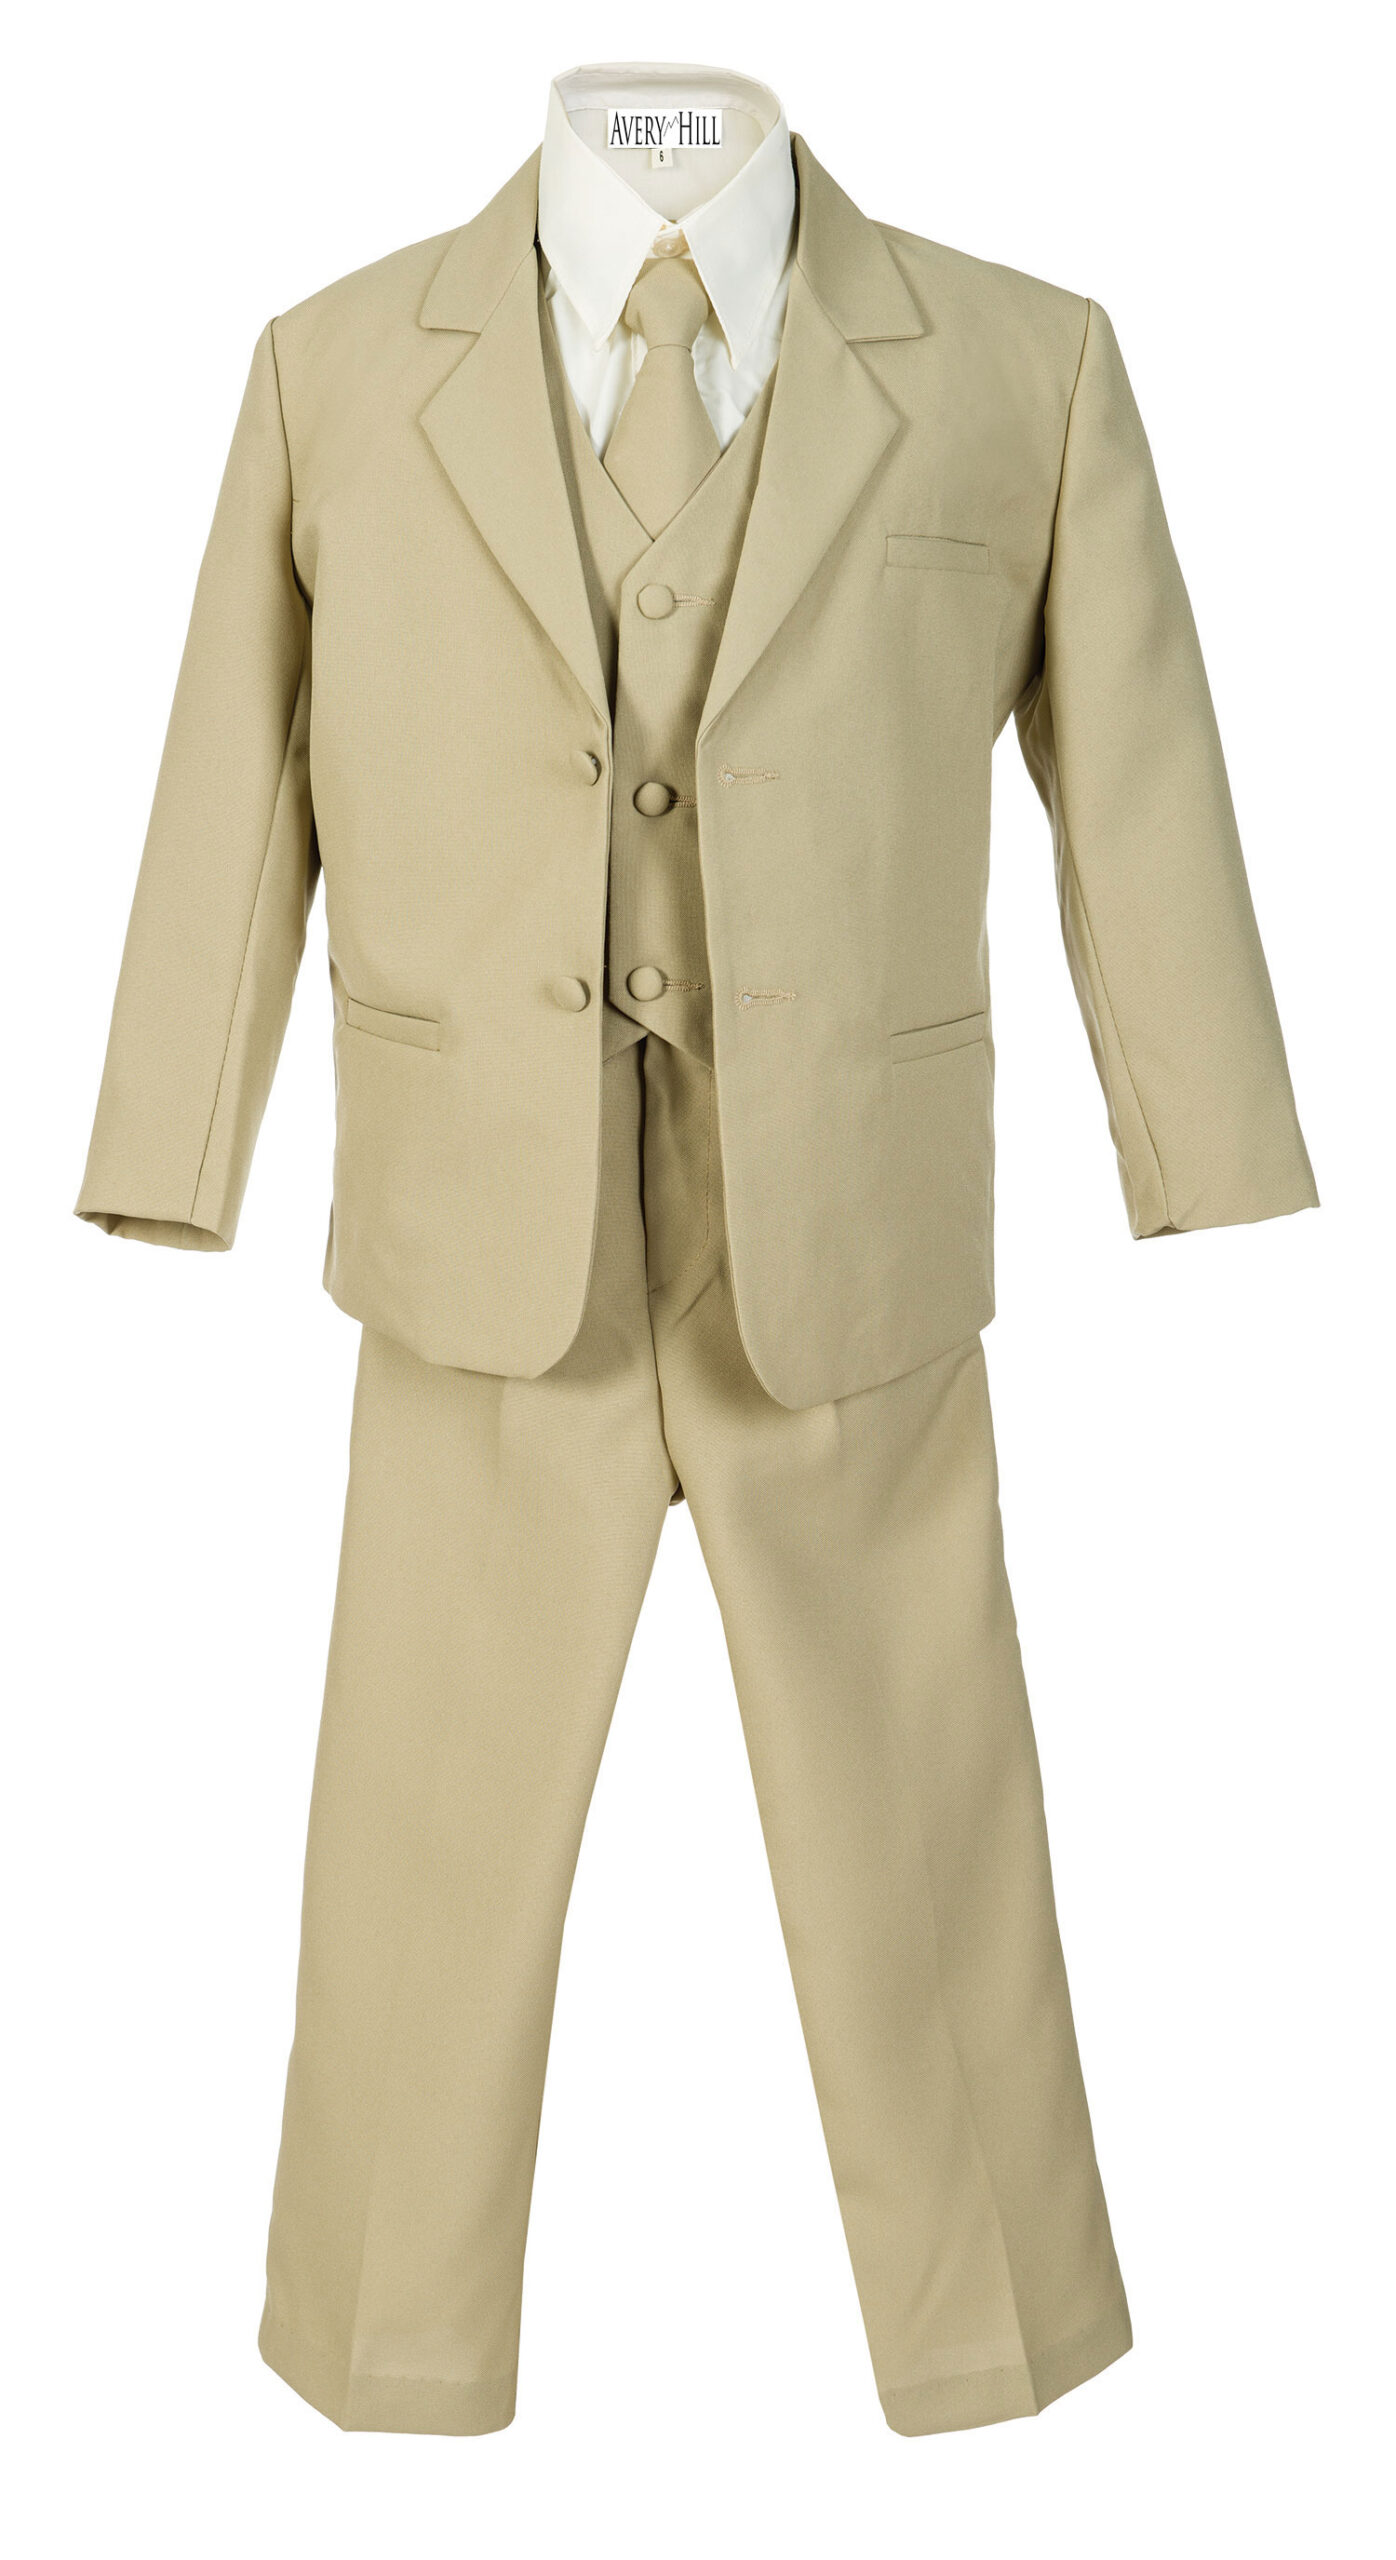 Avery Hill Boys Formal 5 Piece Suit with Shirt and Vest Khaki - 5